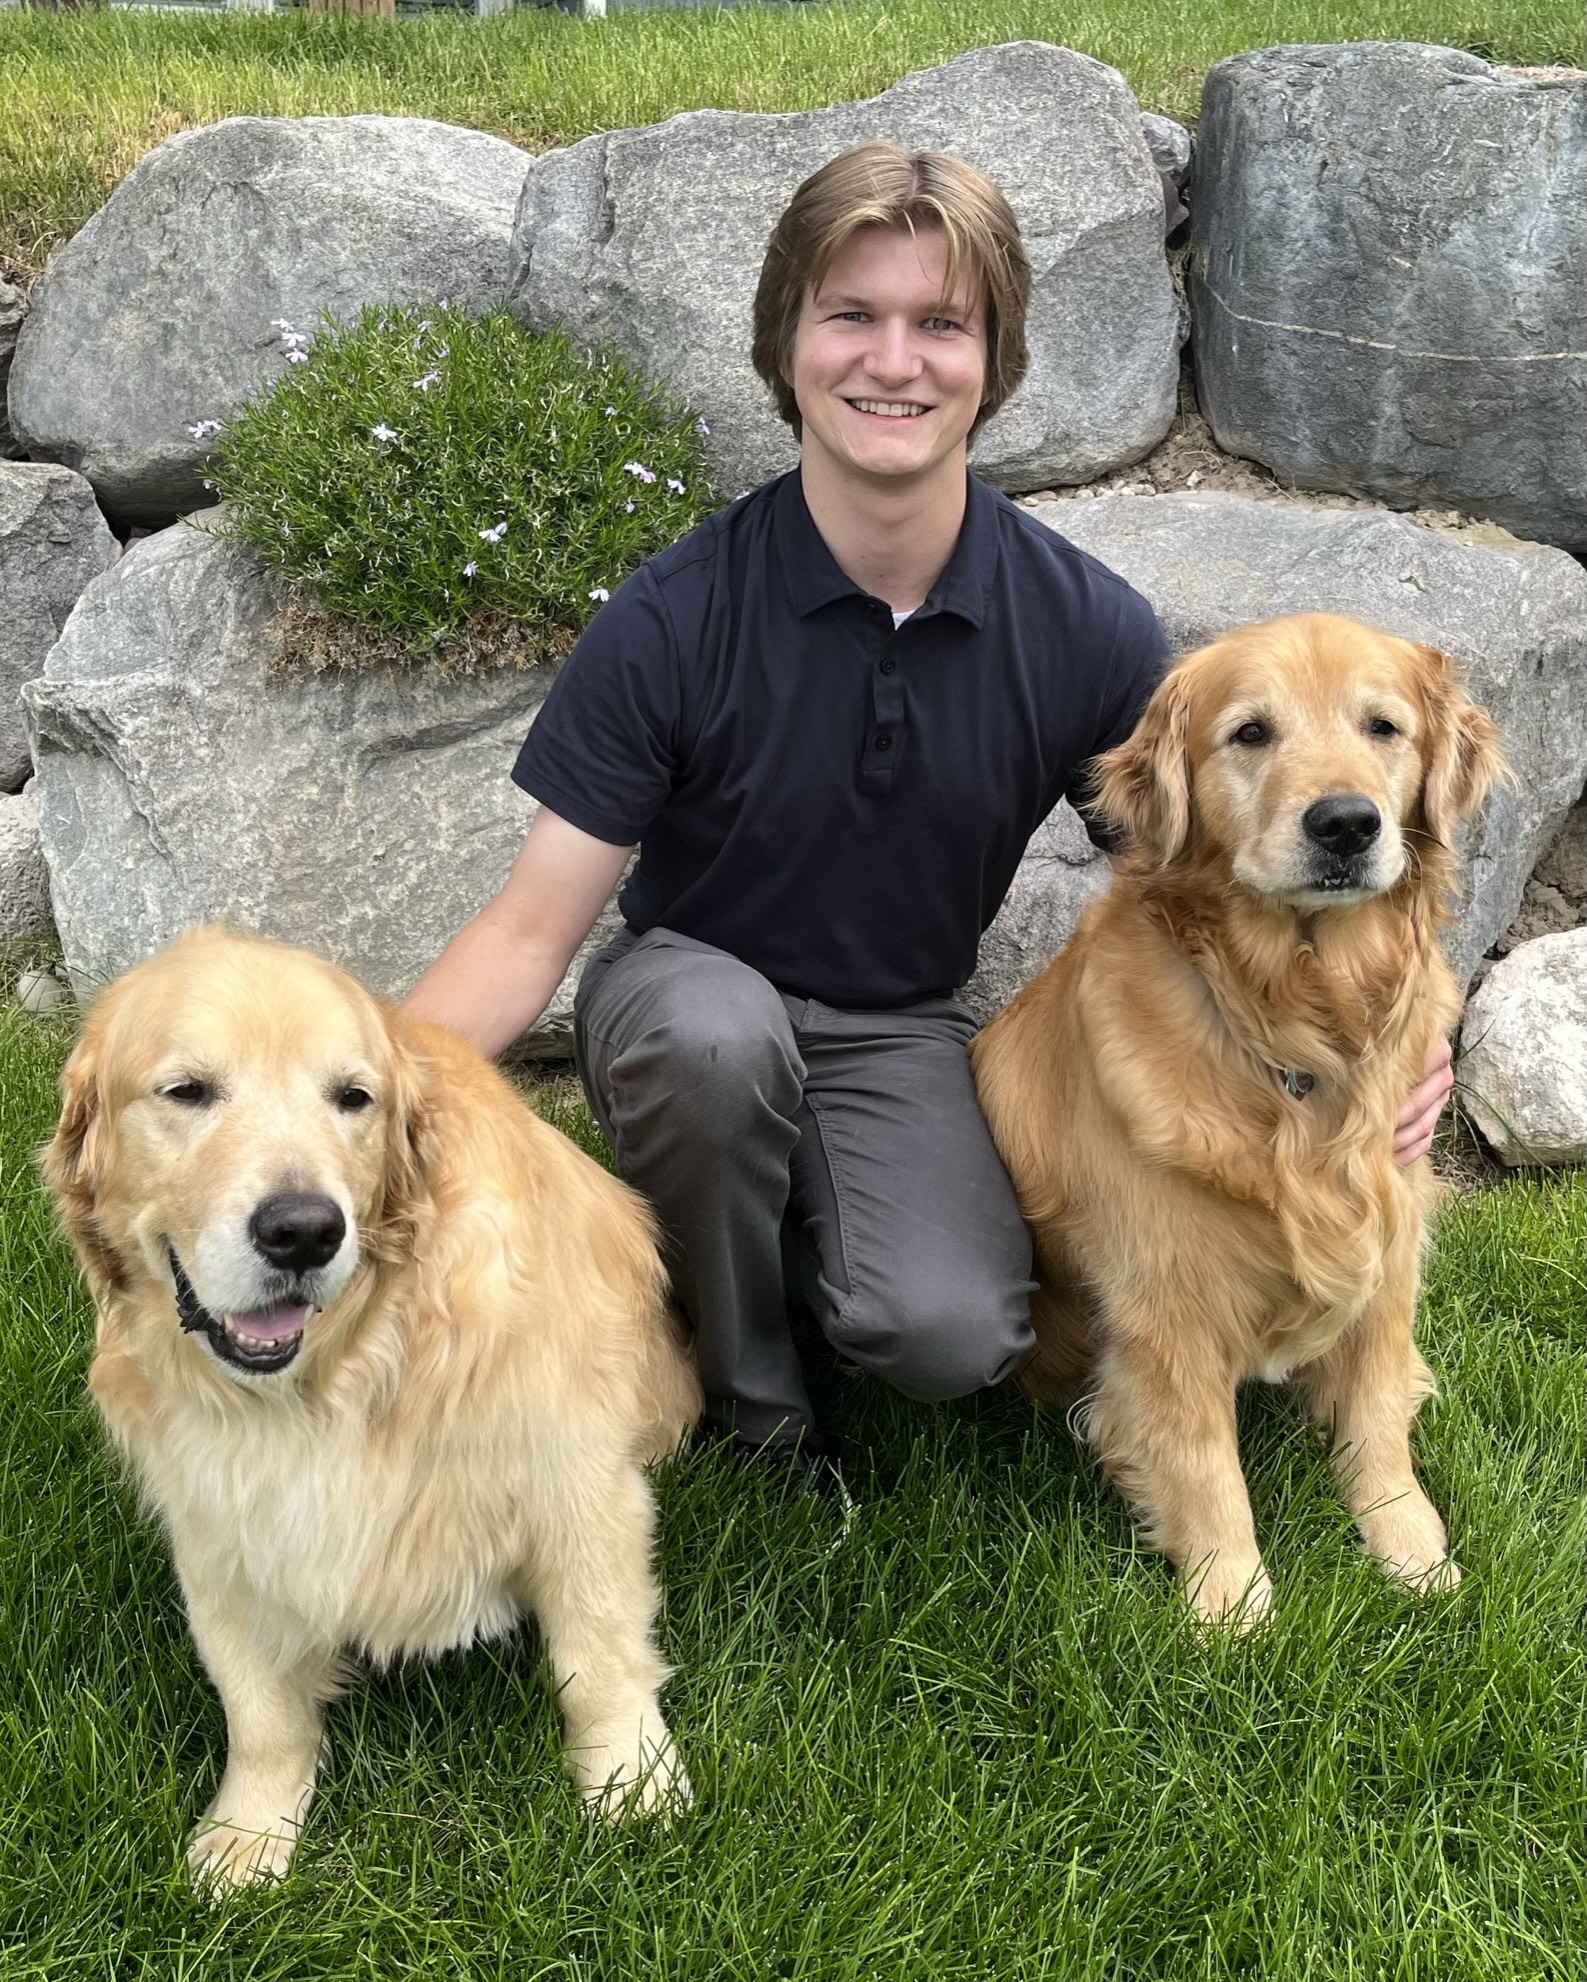 Young male with slightly longer light brown hair, blue short sleeve shirt and gray slacks, with two golden retriever dogs in front of large gray rocks and grass